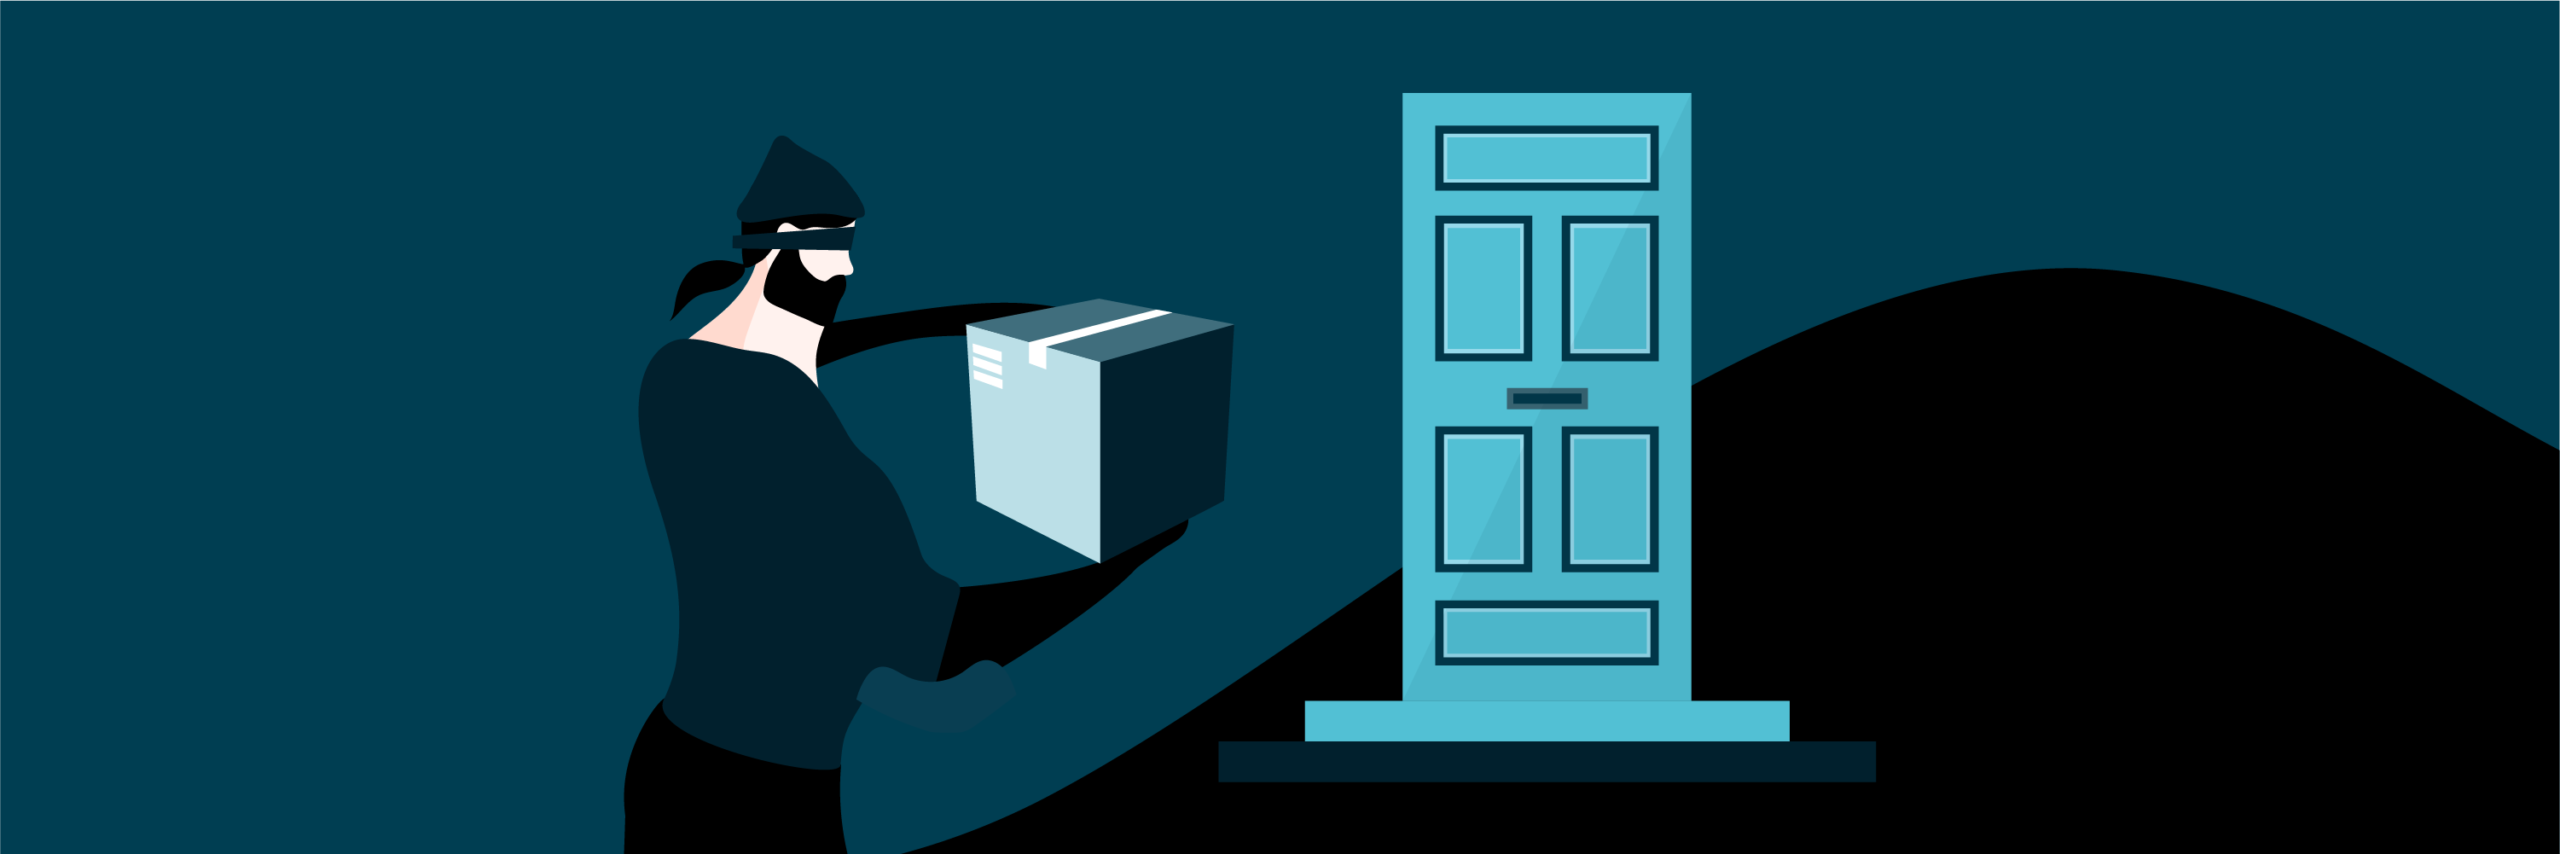 illustrated graphic of a burglar stealing a package.